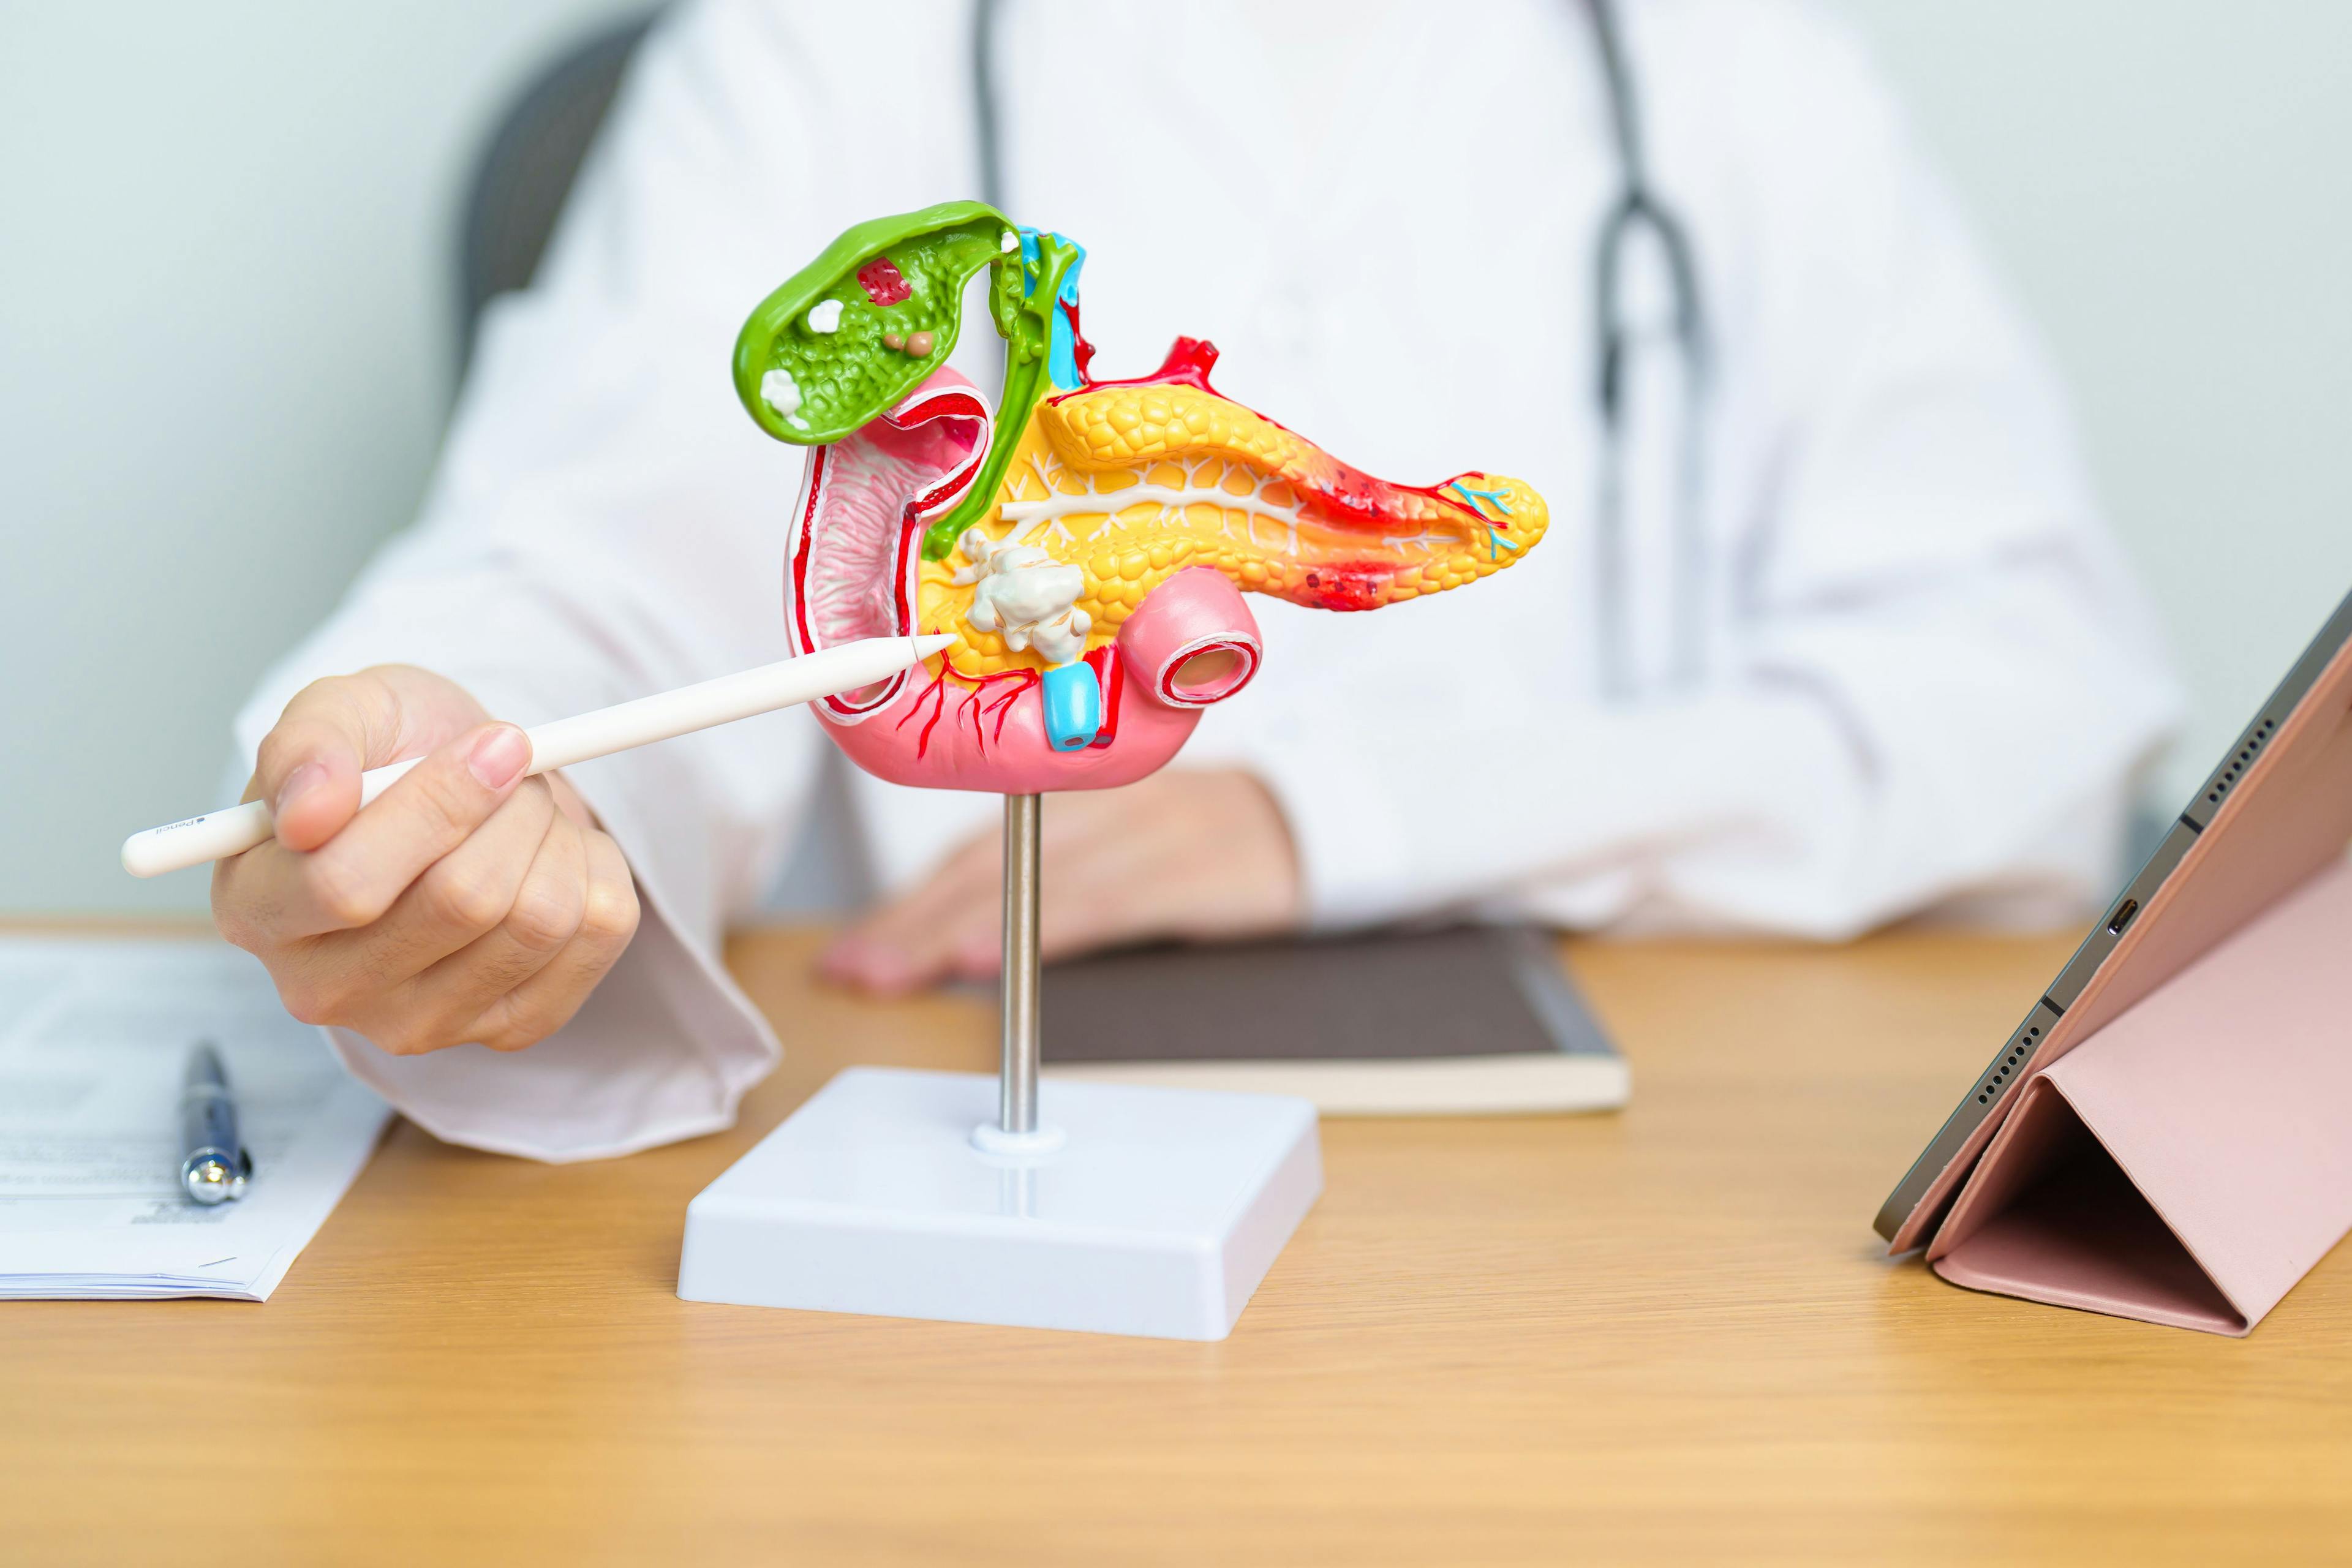 Health care worker with model of pancreas -- Image credit: Jo Panuwat D | stock.adobe.com